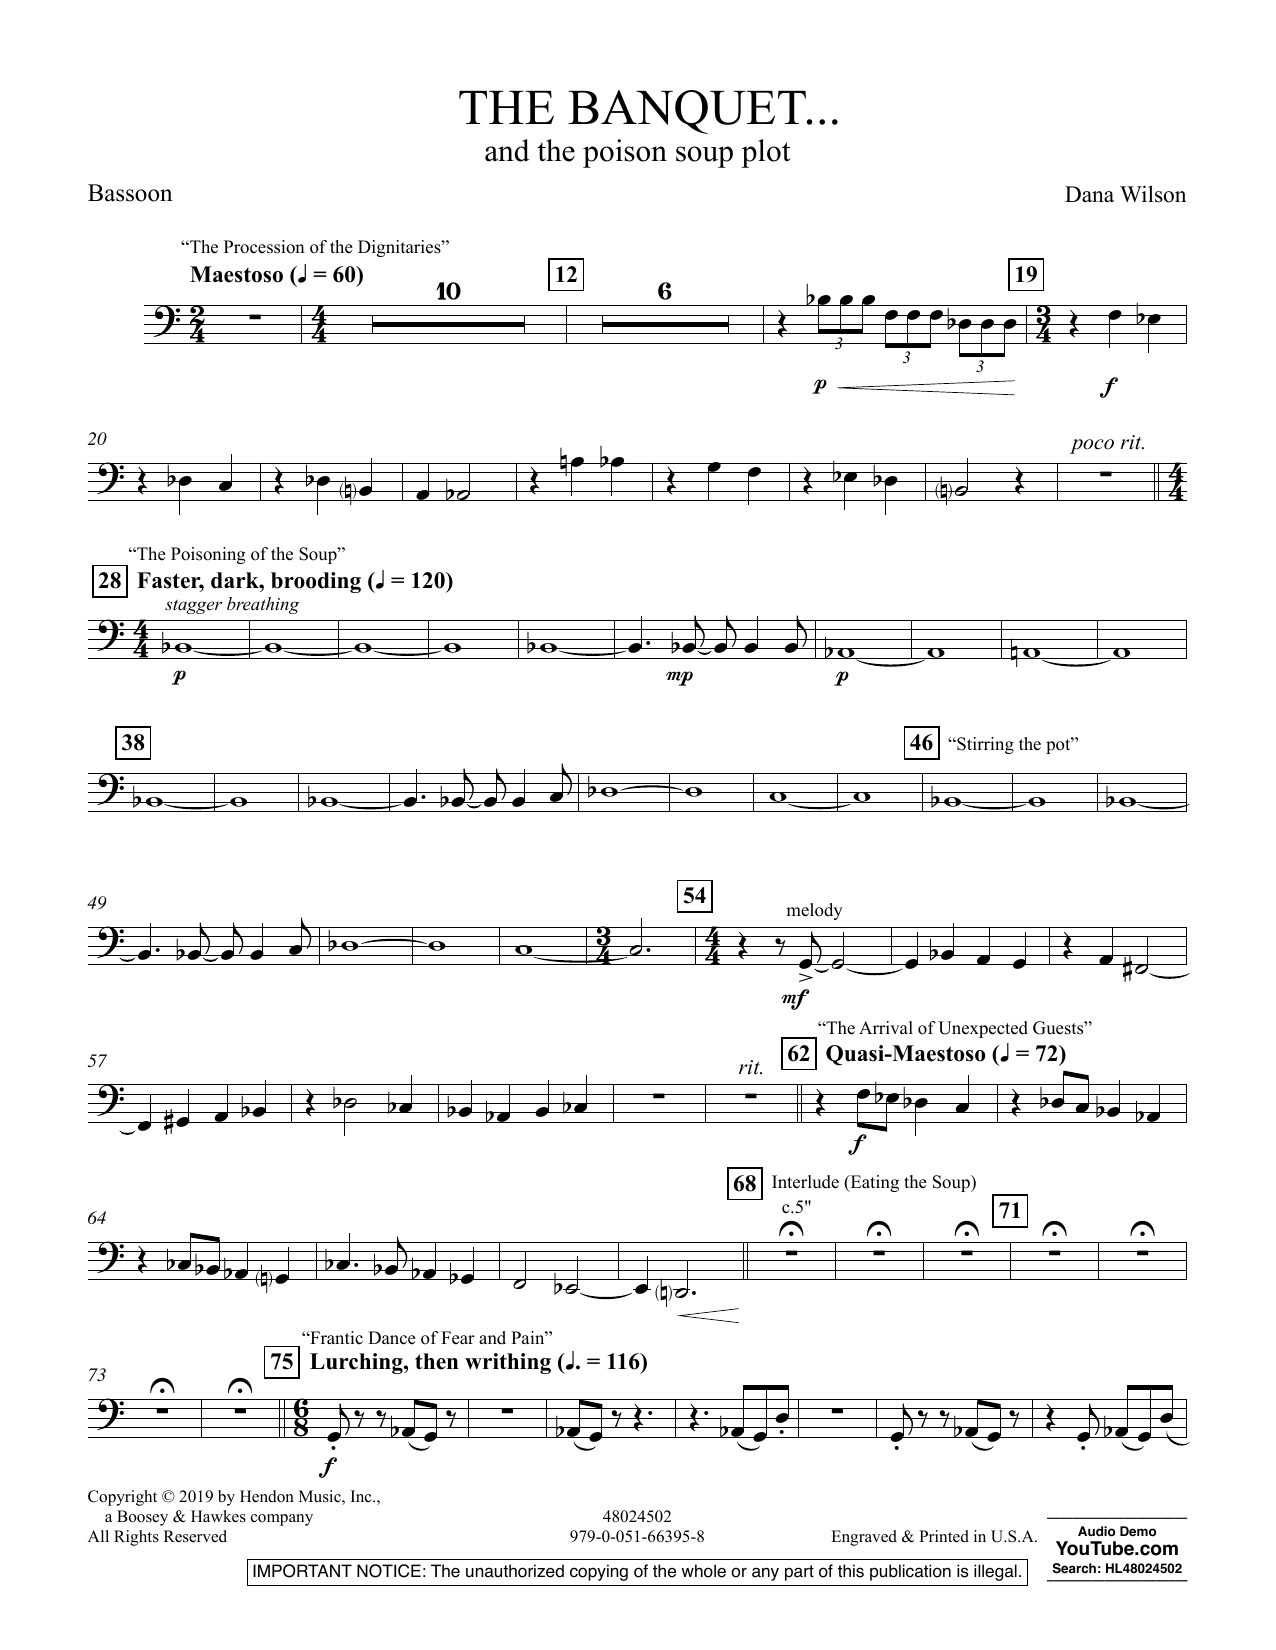 Dana Wilson The Banquet...and the poison soup plot - Bassoon sheet music preview music notes and score for Concert Band including 2 page(s)